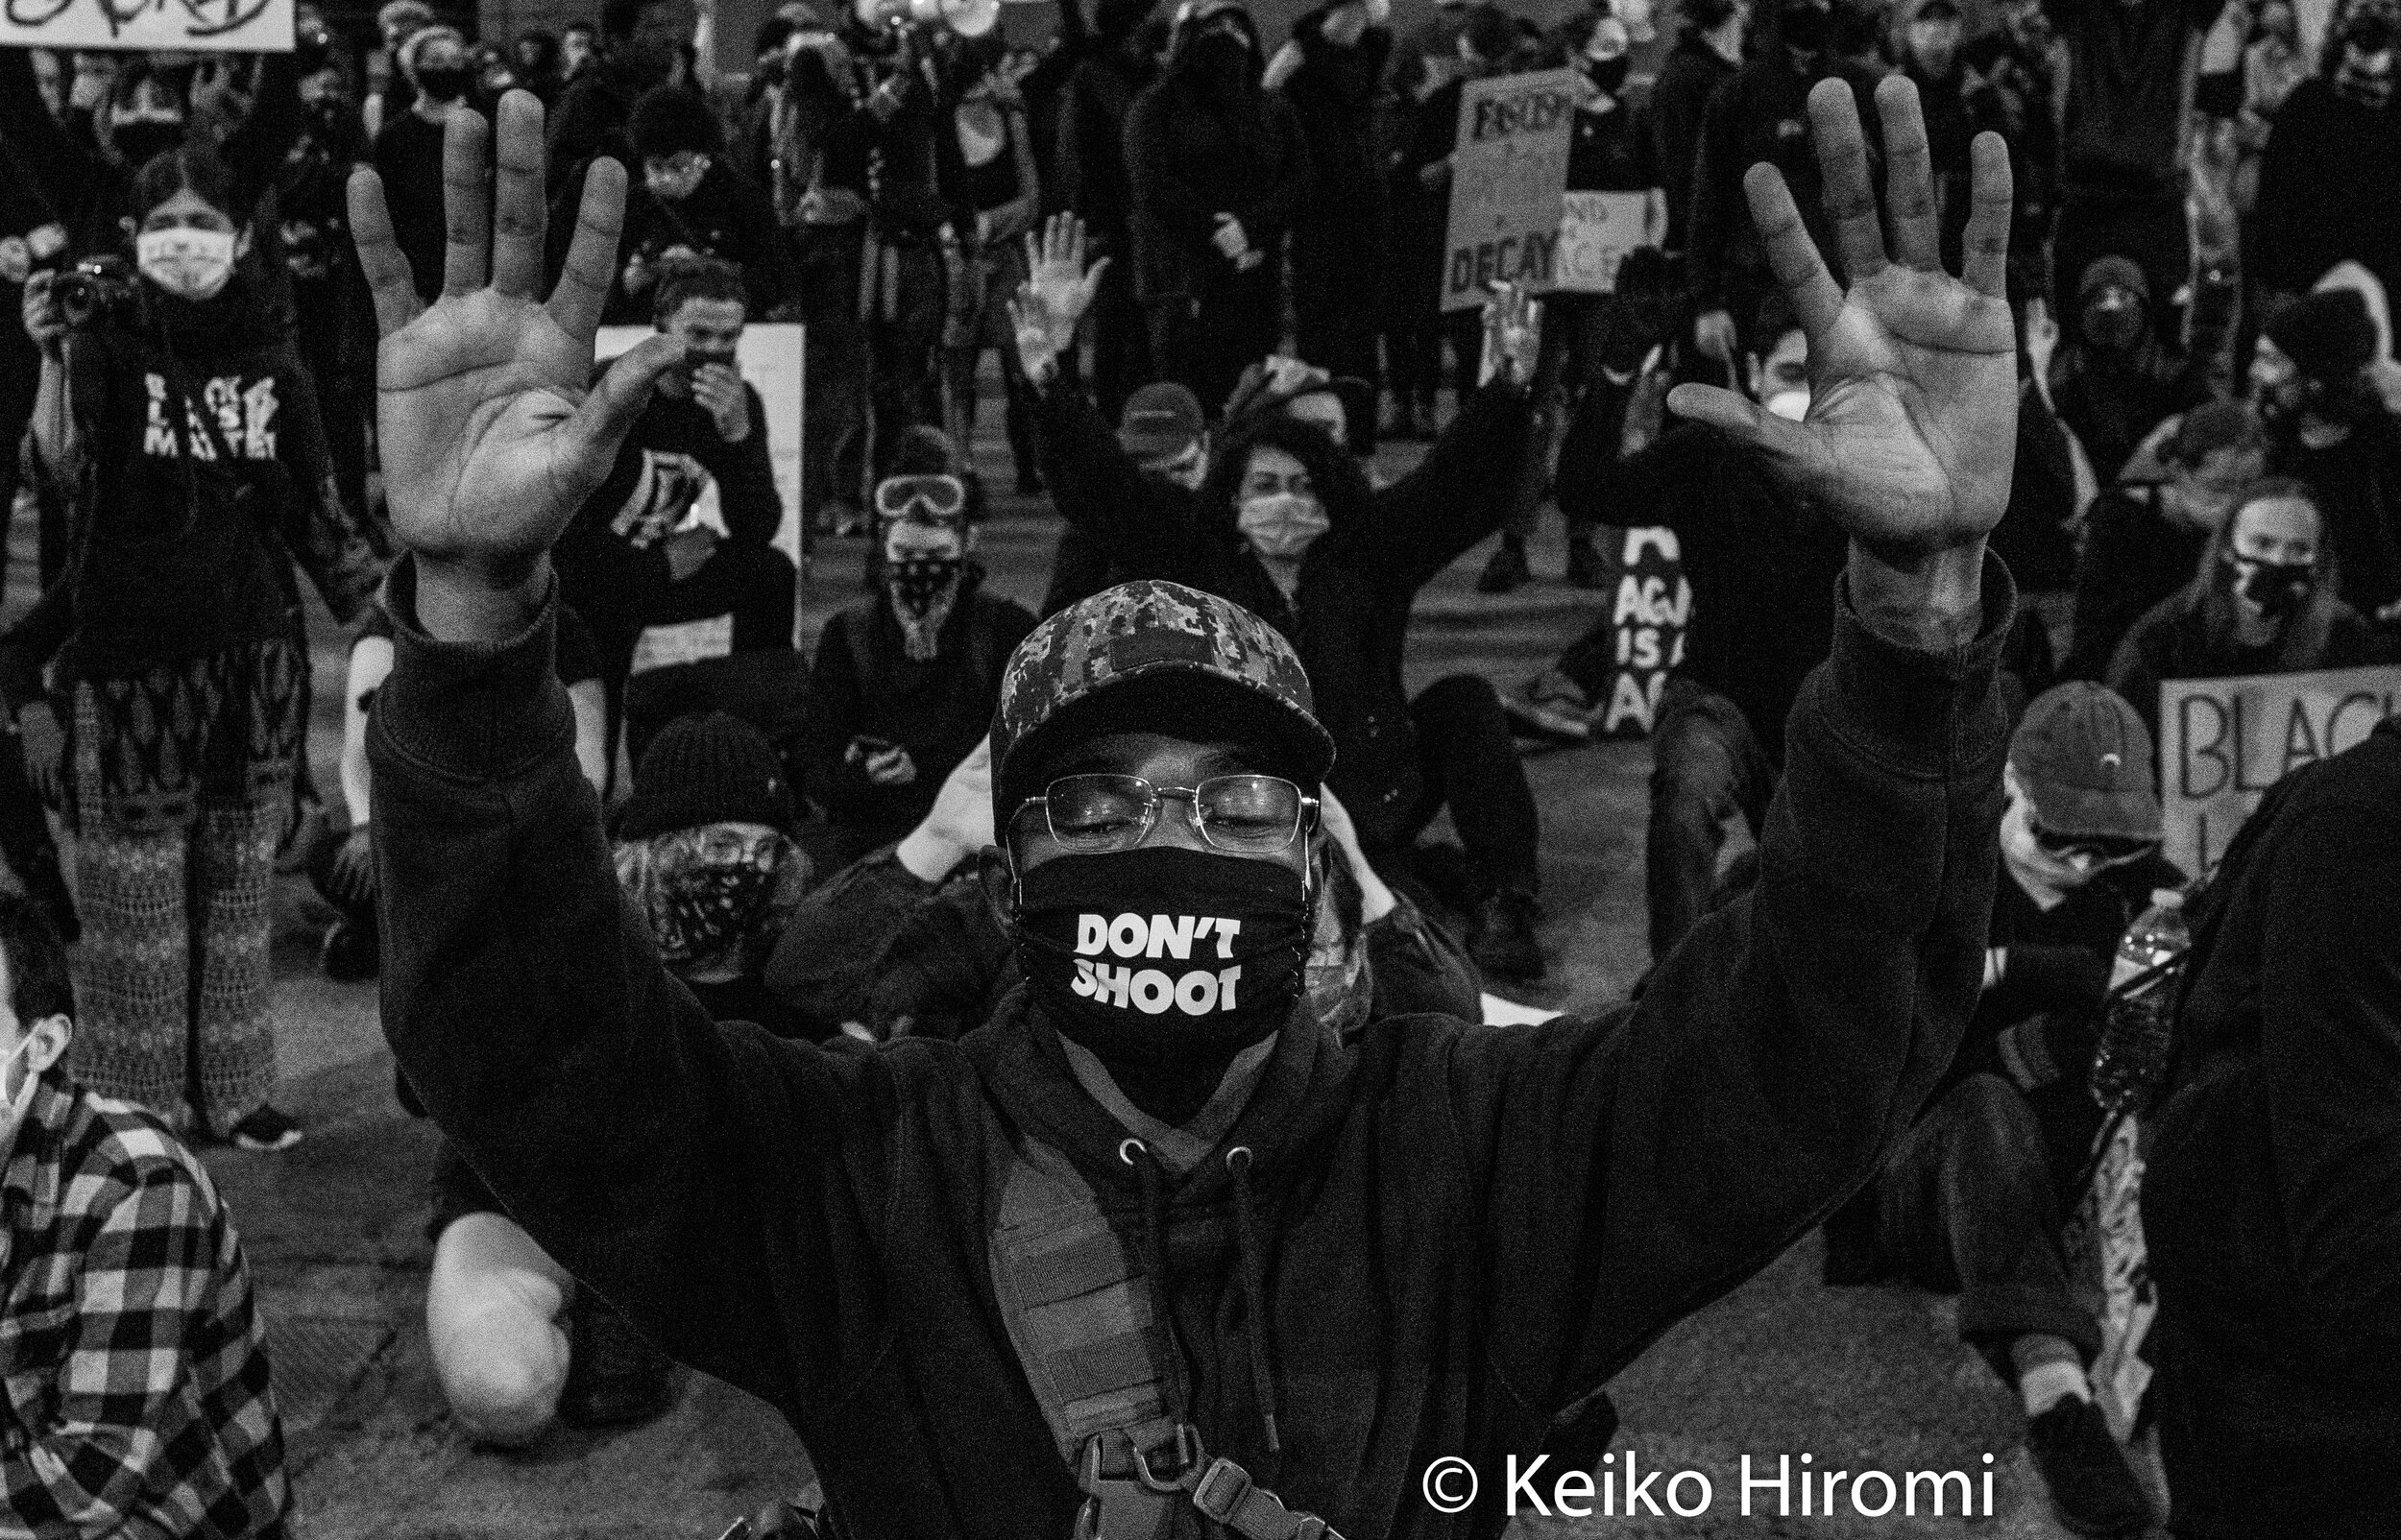  June 7, 2020, Boston, Massachusetts, USA: A protester, wearing a face mask "Don't shoot" kneels hands up during a rally in response to deaths of George Floyd and against police brutality and racism  in Boston. 